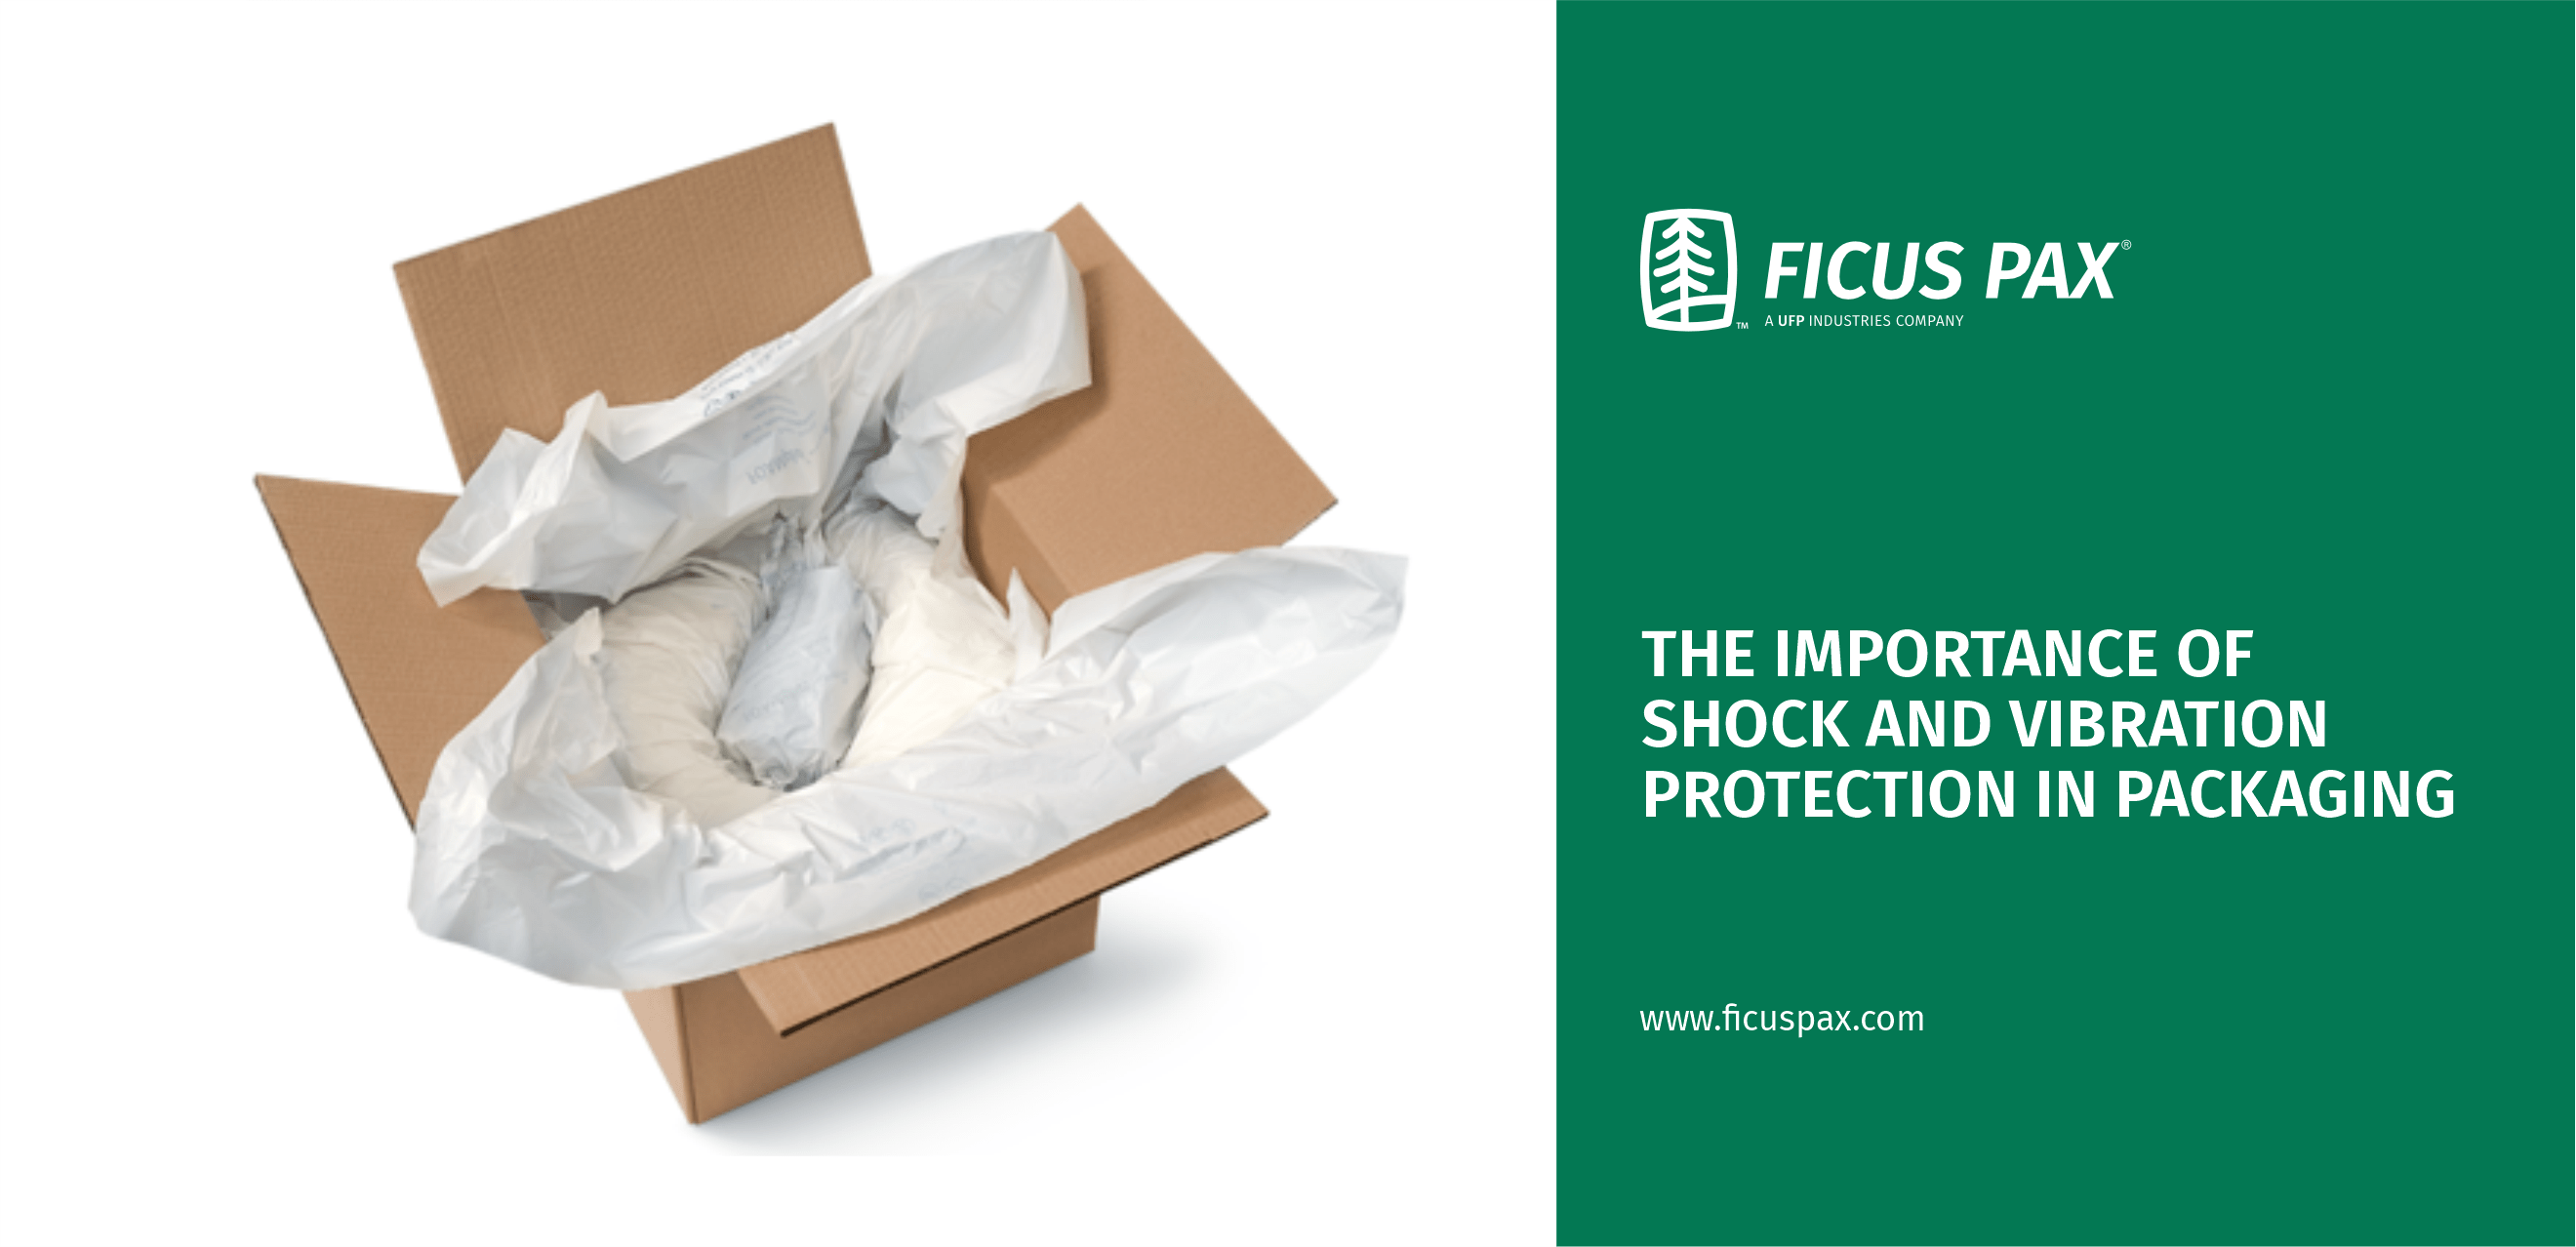 the-importance-of-shock-and-vibration-protection-in-packaging-ficus-pax